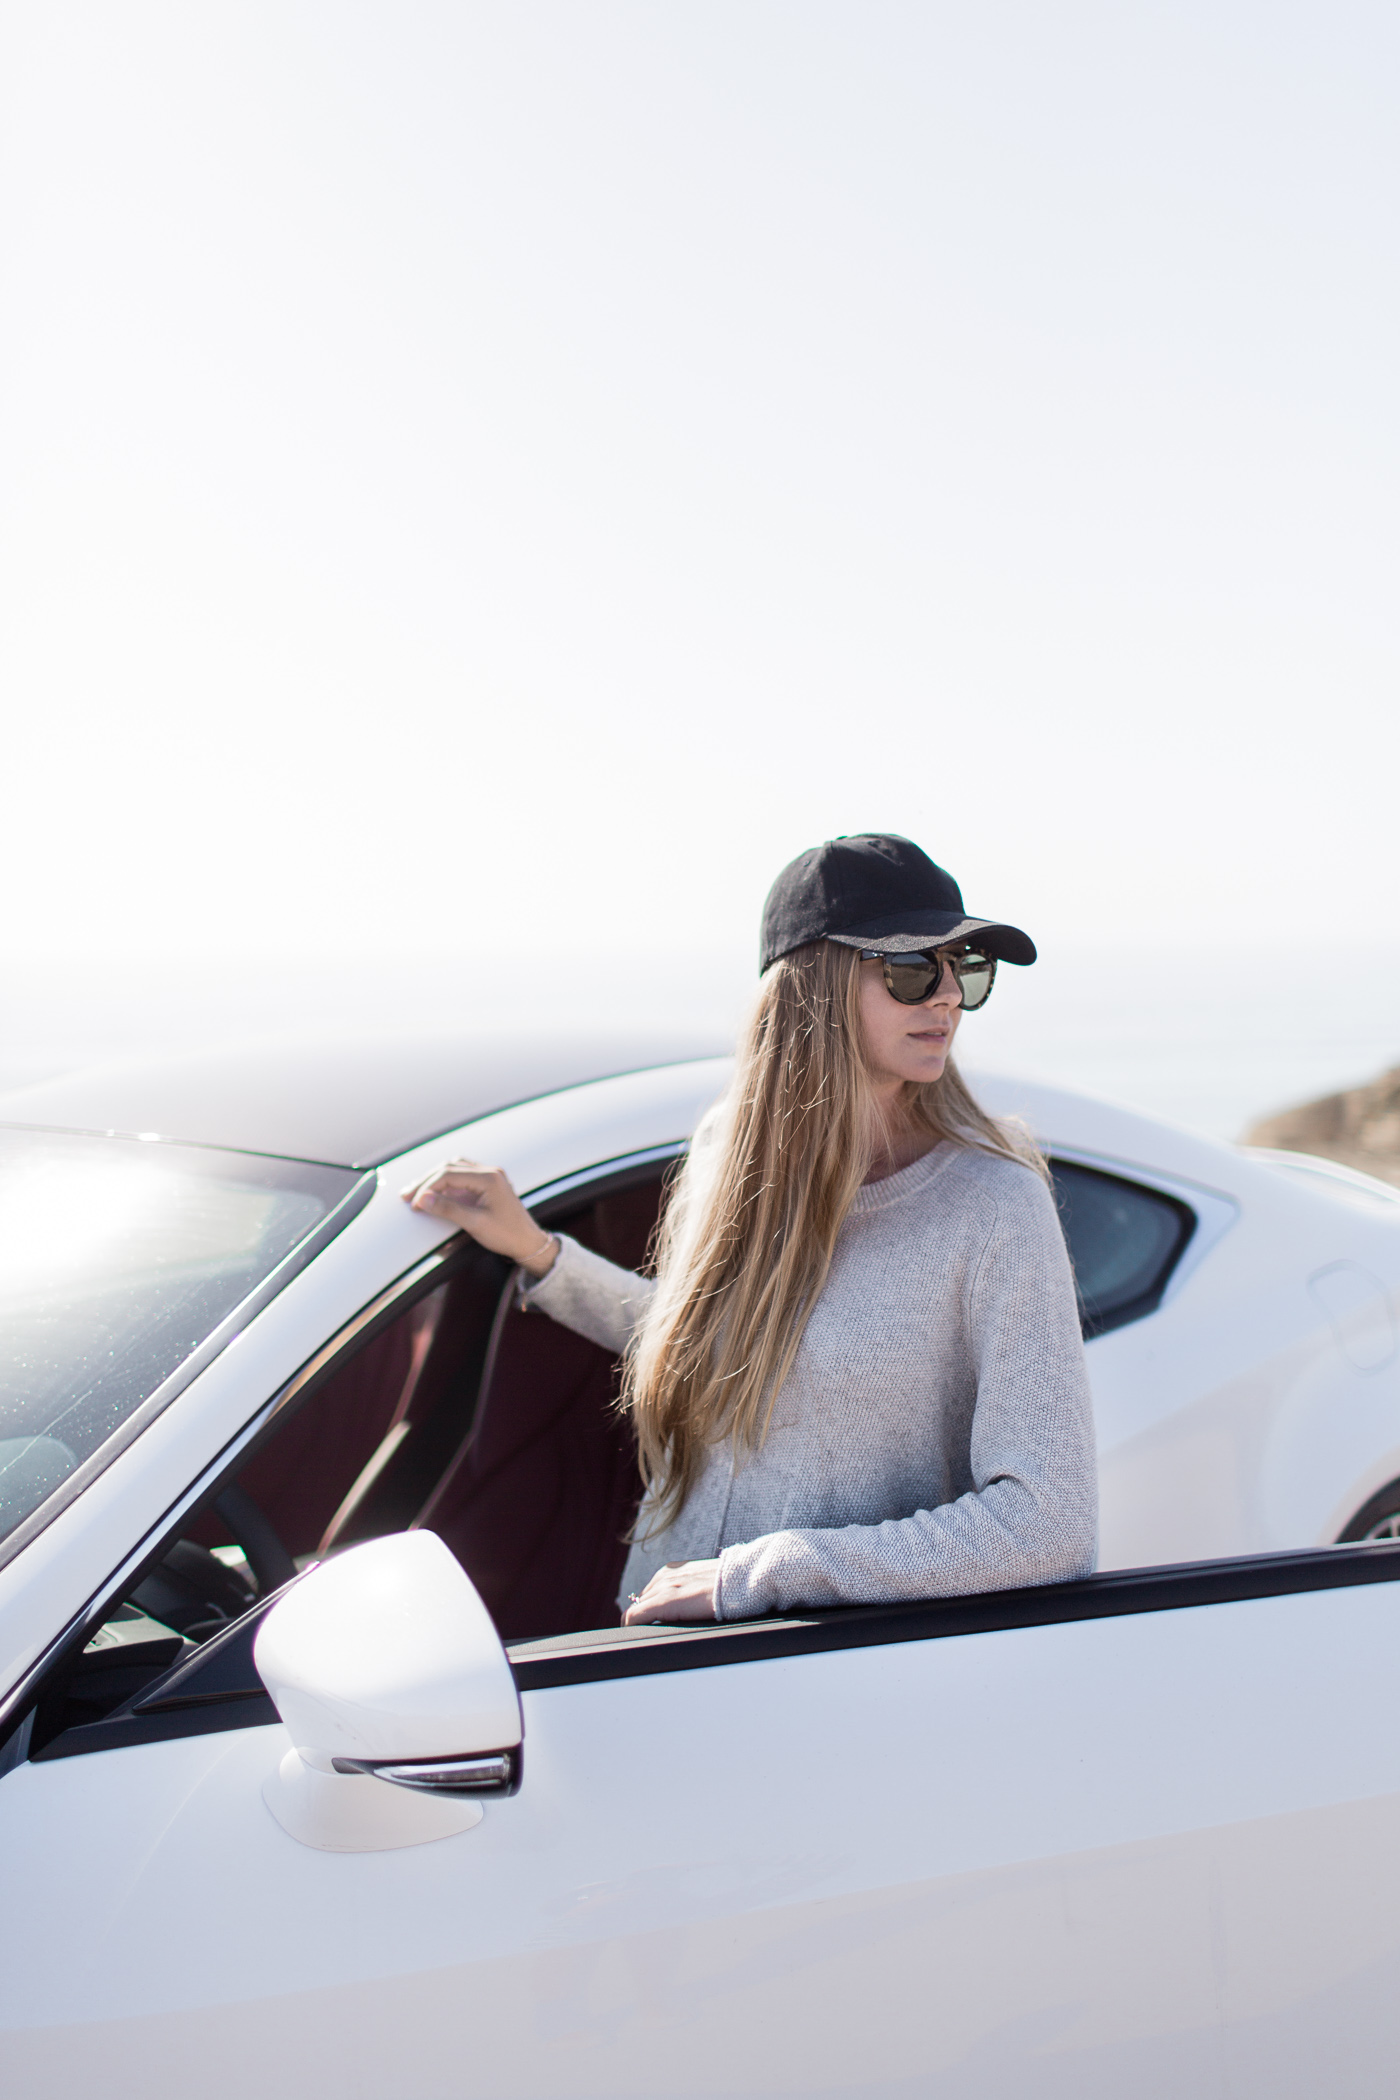 Lexus RC F, and the perfect road trip outfit.